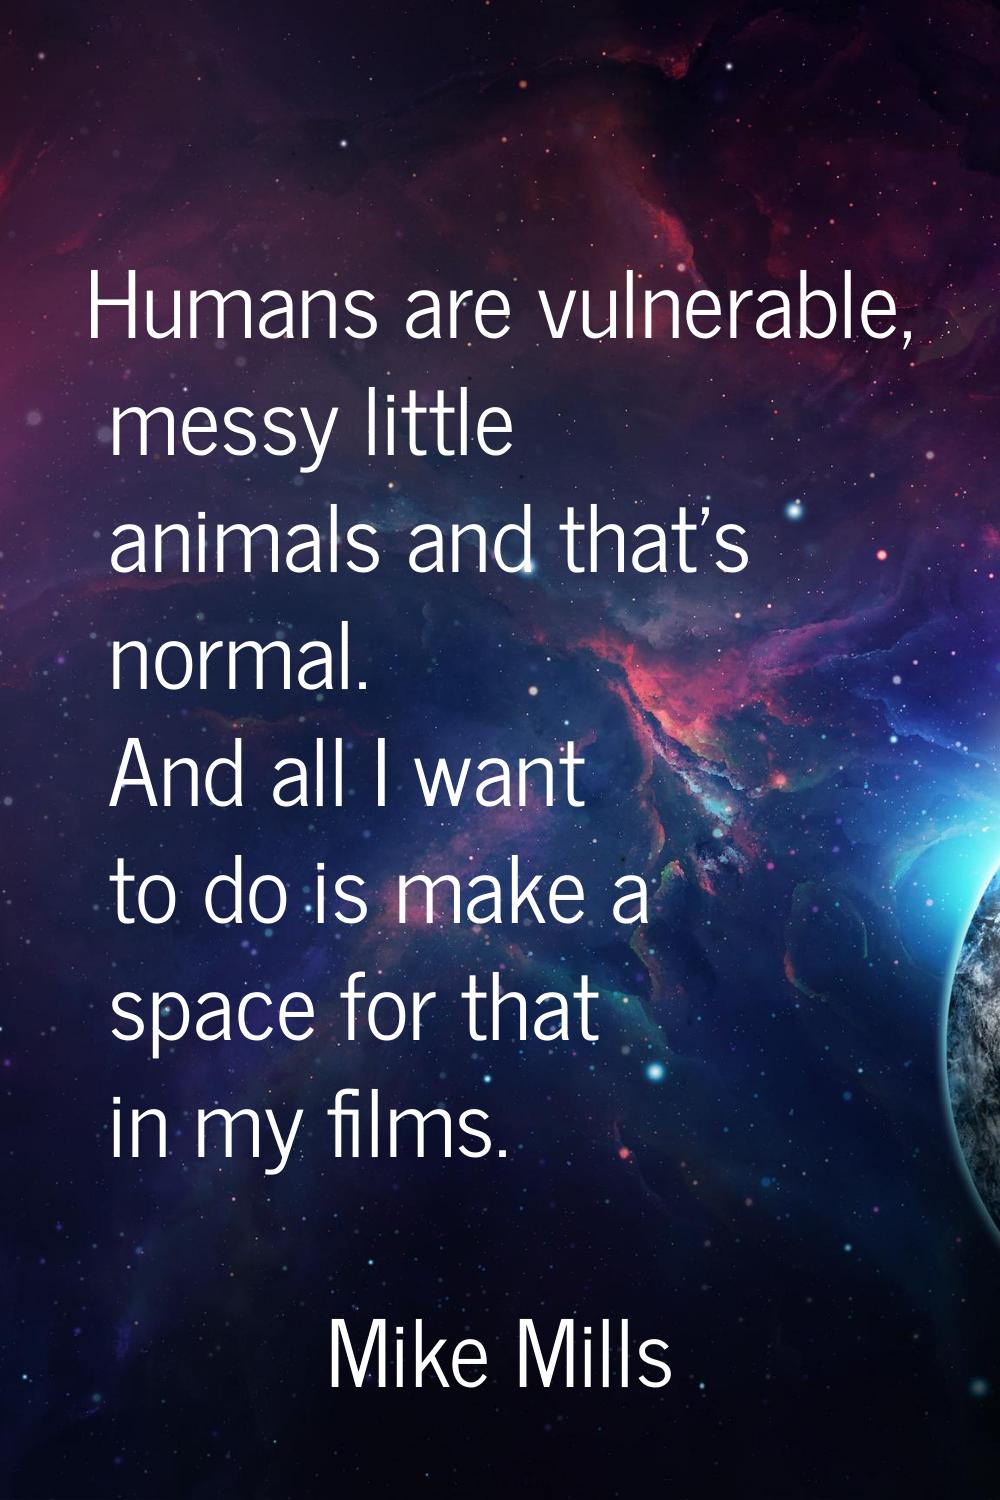 Humans are vulnerable, messy little animals and that's normal. And all I want to do is make a space